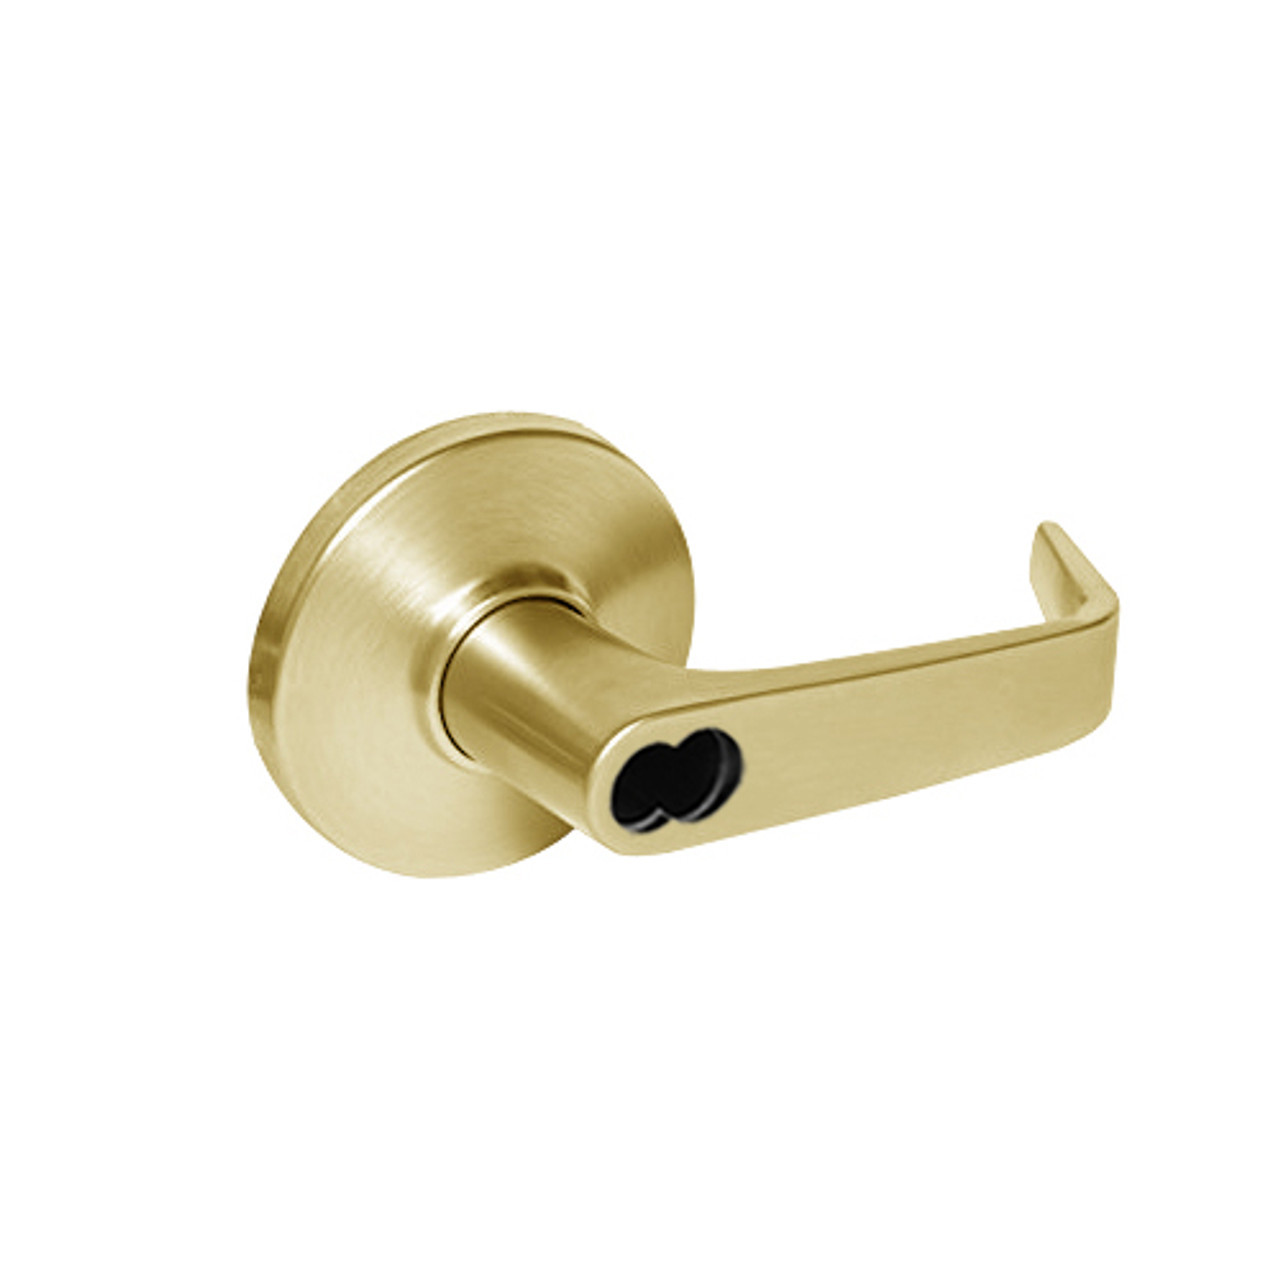 9K37RD15DS3605LM Best 9K Series Special Function Cylindrical Lever Locks with Contour Angle with Return Lever Design Accept 7 Pin Best Core in Bright Brass